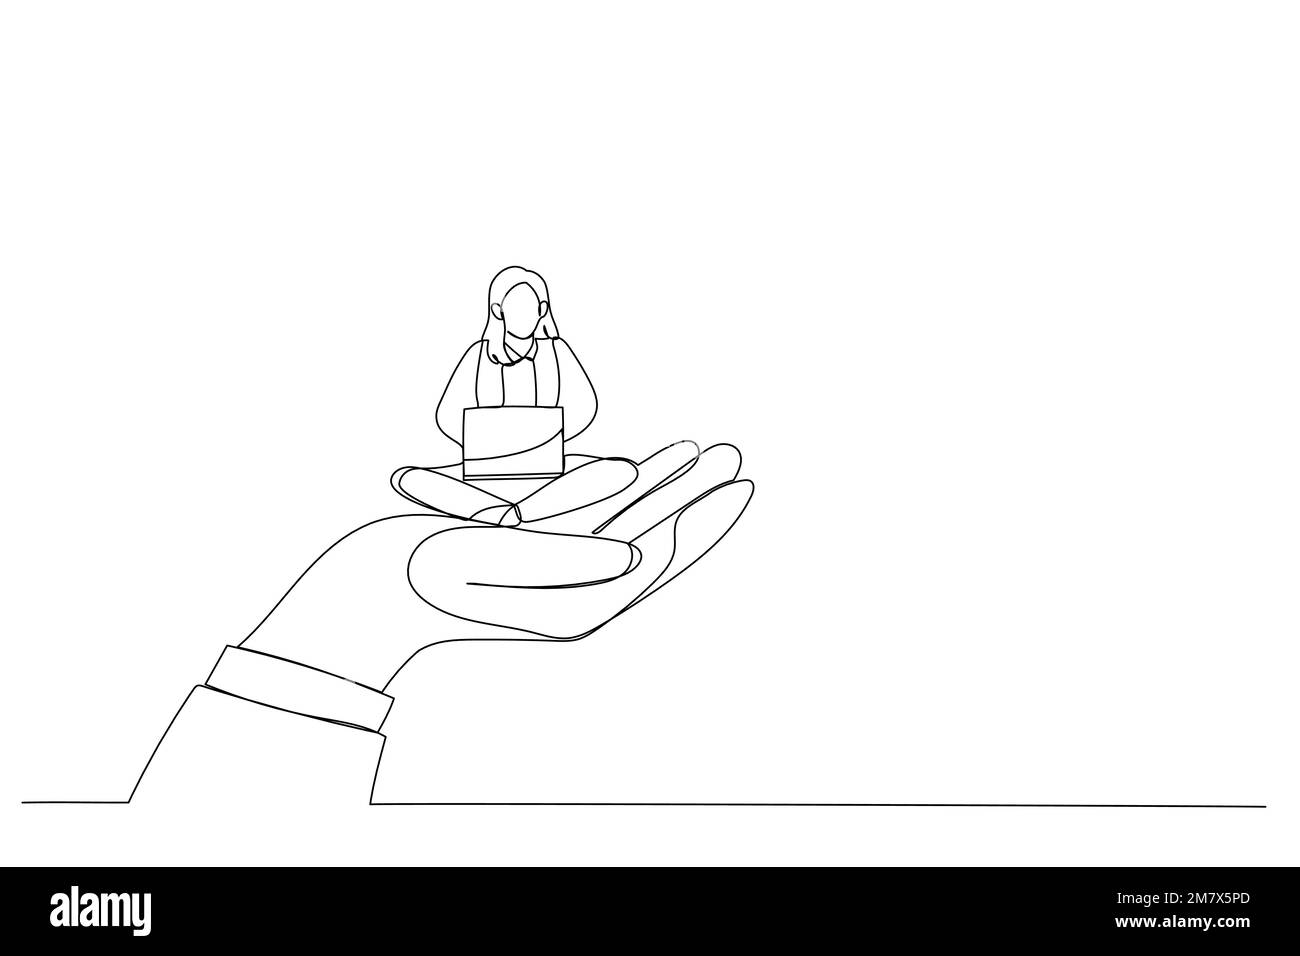 Illustration of giant hand holding a businesswoman who works on laptop, metaphor for employee care, corporate support. Single line art style Stock Vector